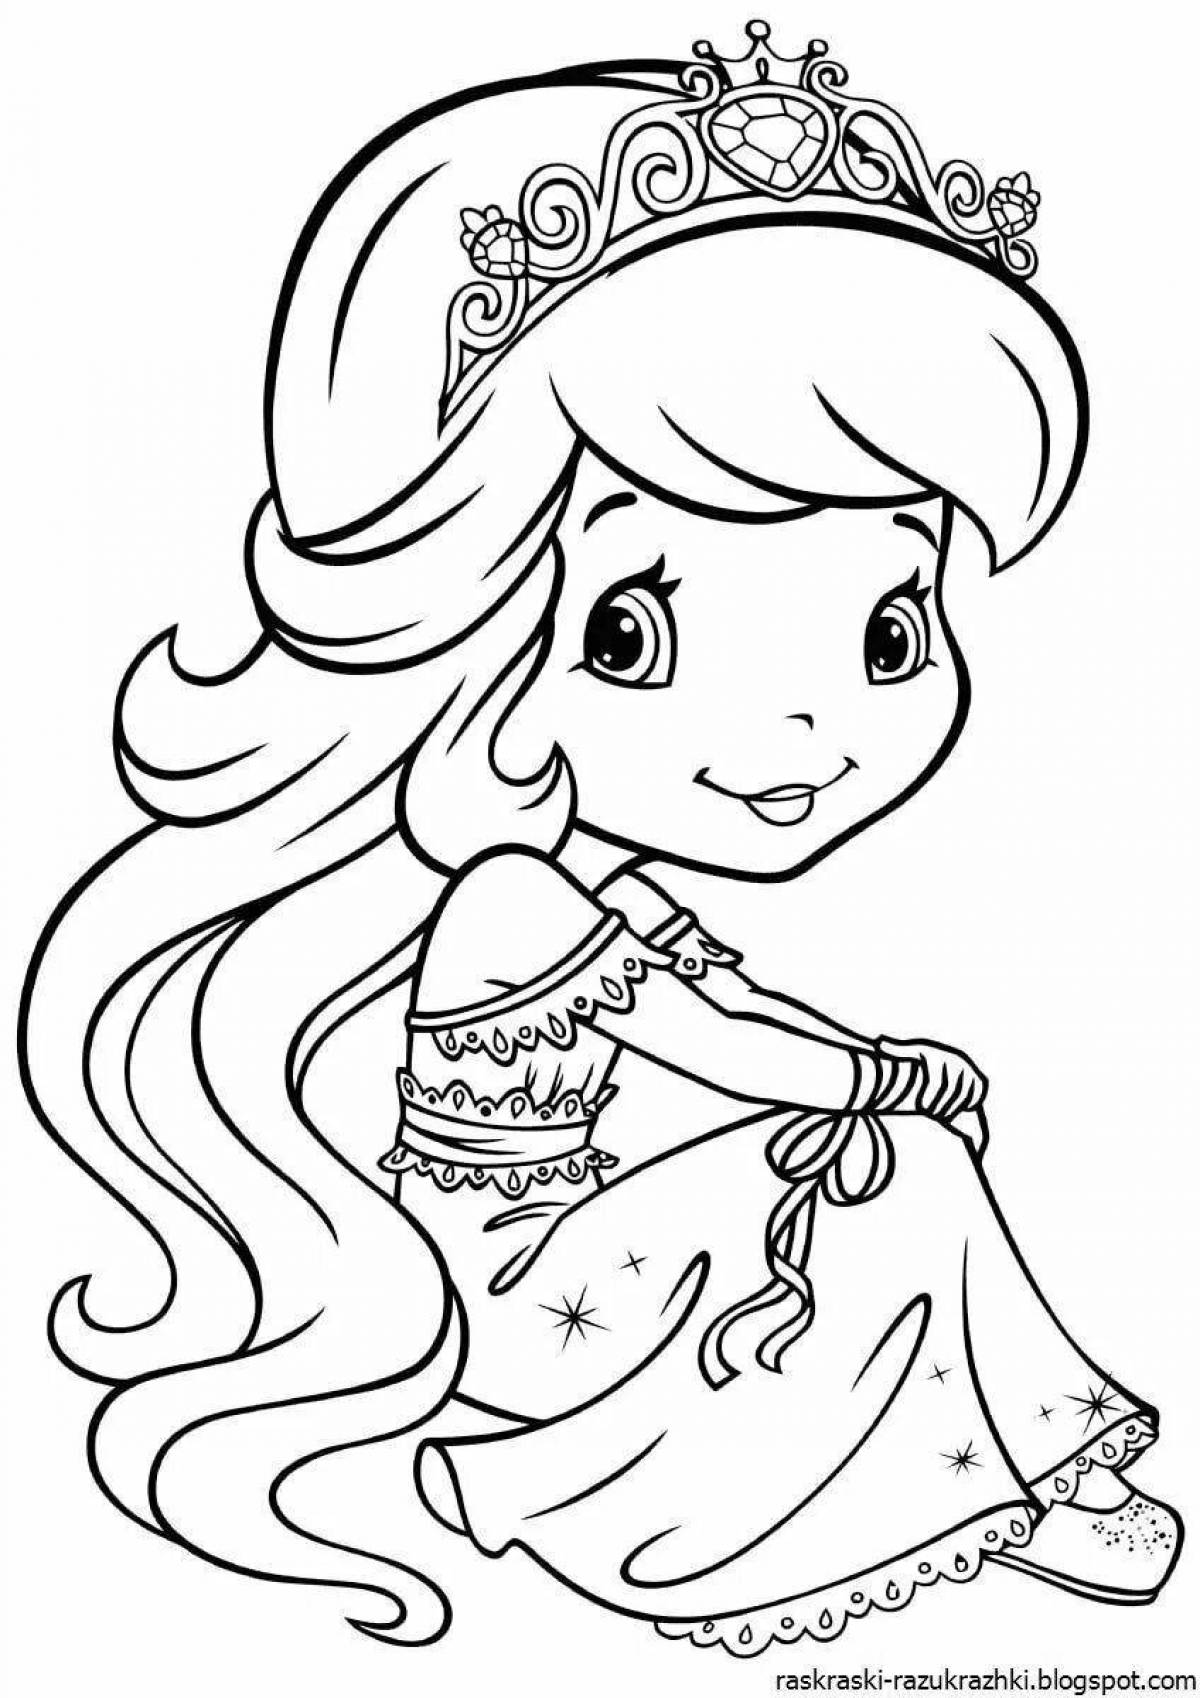 Great coloring book for girls 5 years old, princess